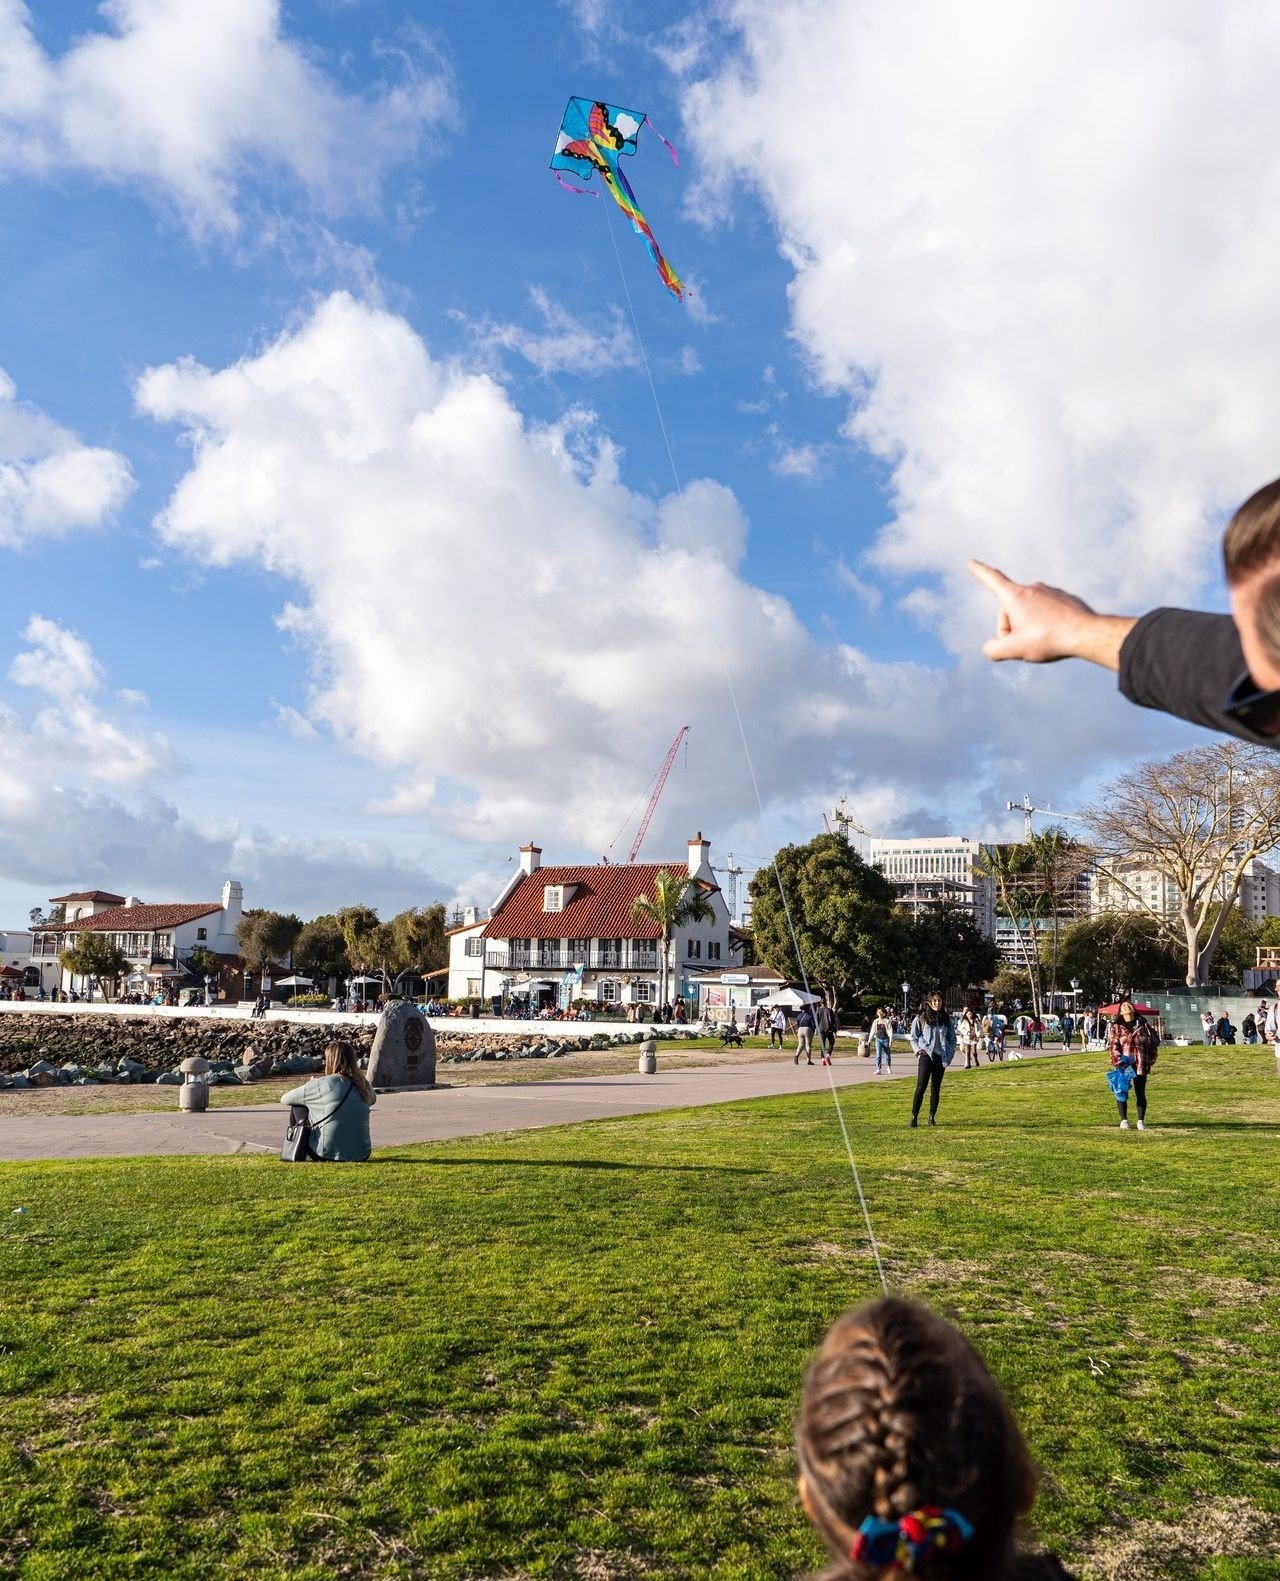 Did you know @kiteflitesd offers complimentary kite flying lessons? Come visit the shop, grab a kite, and fly before you buy right here on our Embarcadero Lawn!🪁💙